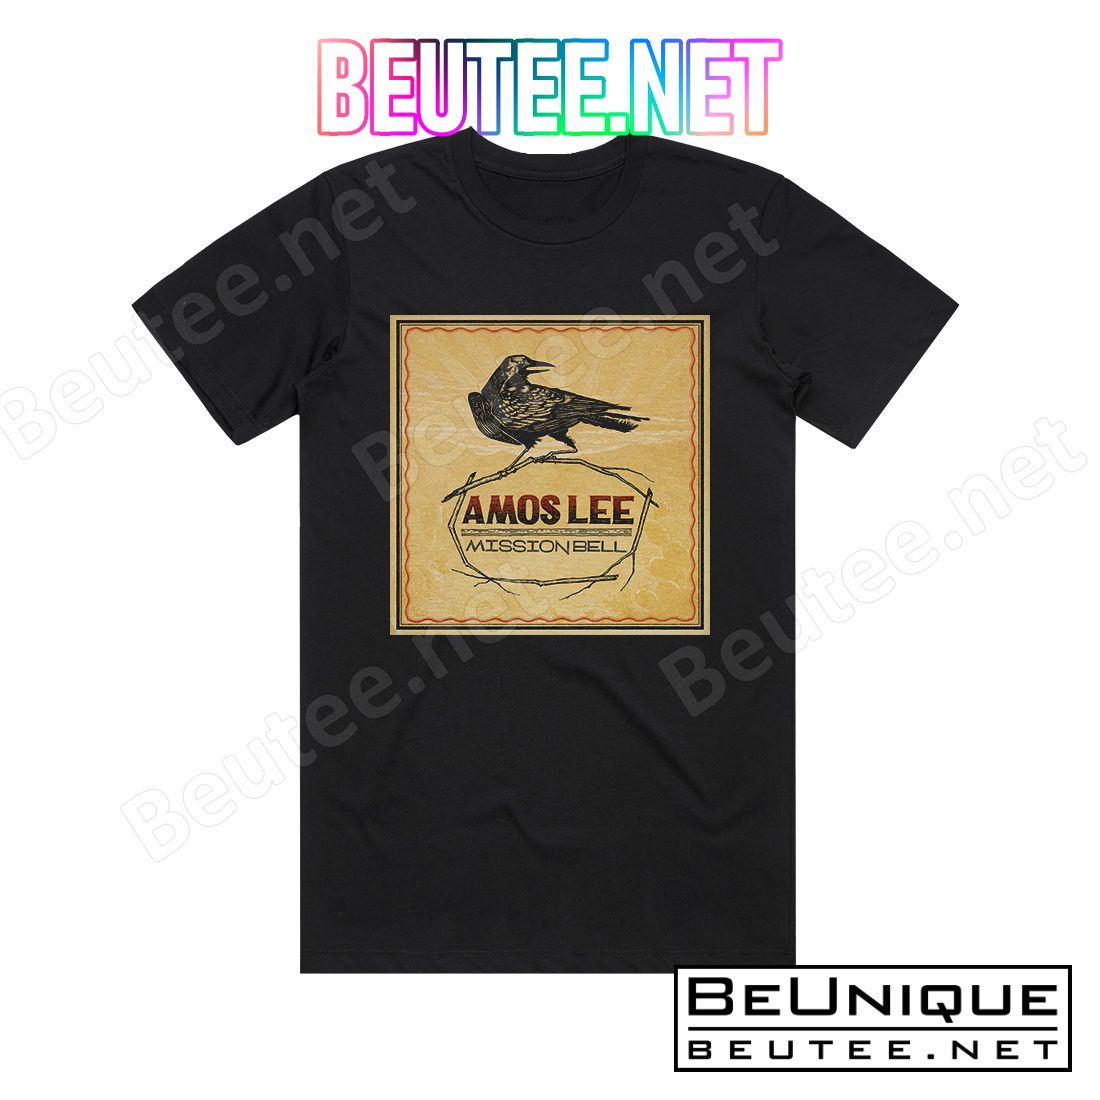 Amos Lee Mission Bell Album Cover T-Shirt